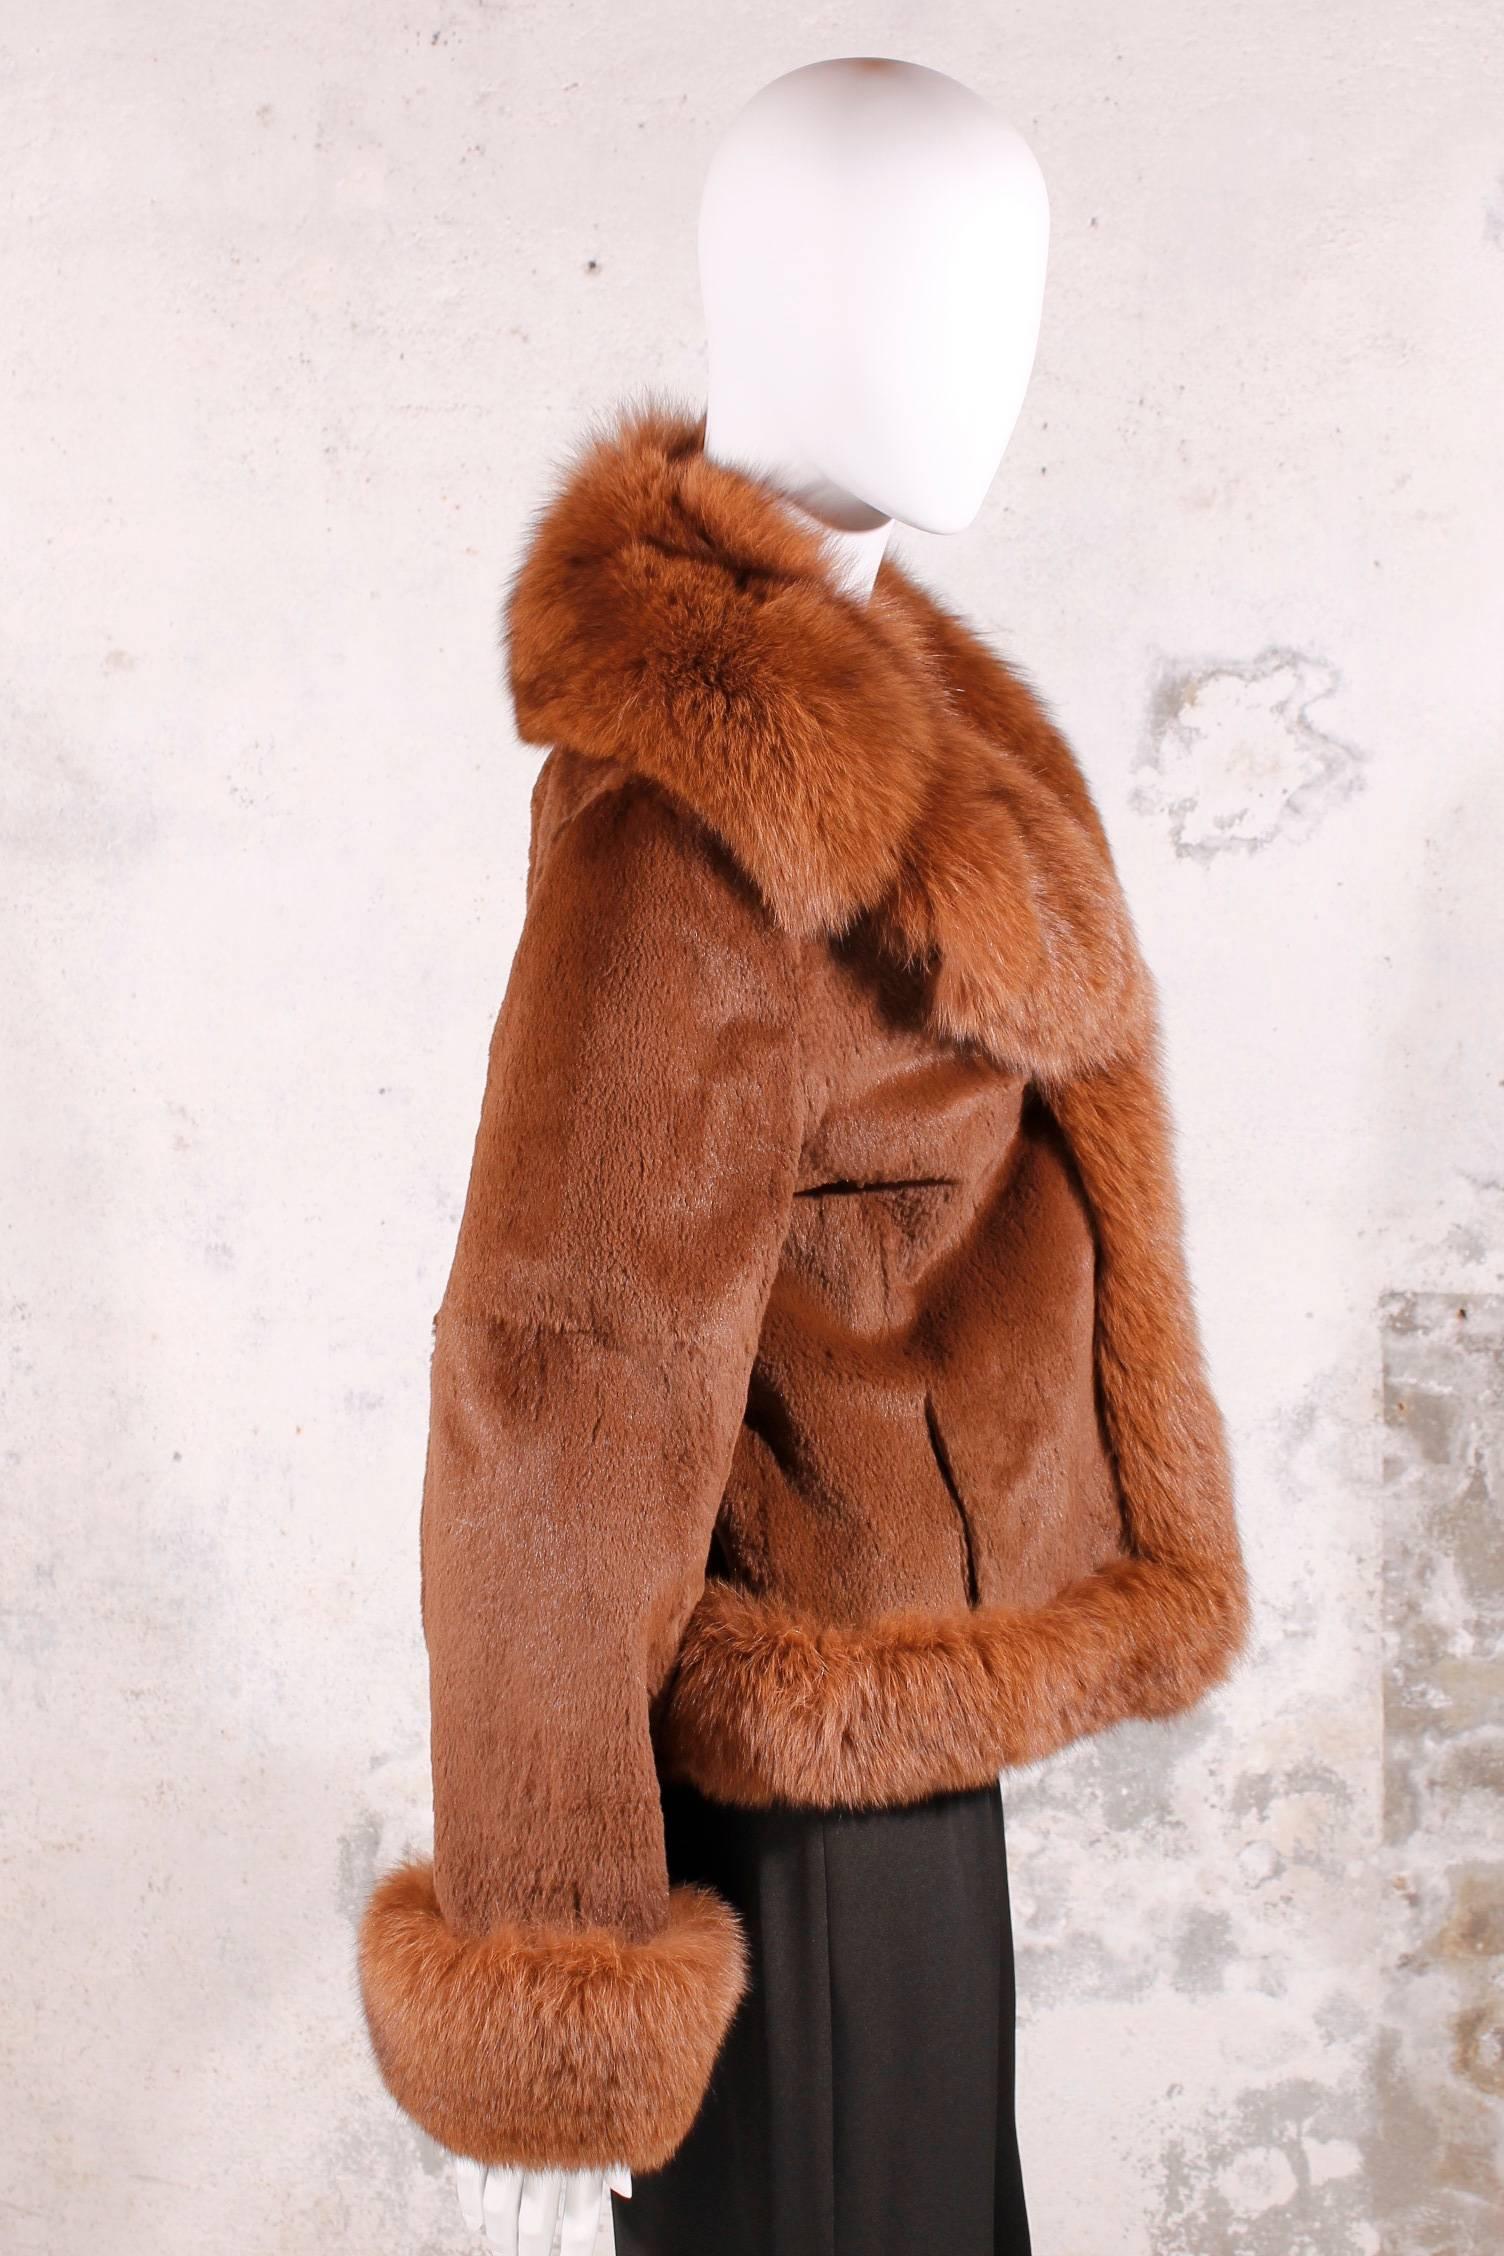 Chic fur jacket from a very exclusive and expensive Russian label called Black.
Made of farmed blue fox- and rabbit fur in a stunning russet brown.
Coat has a large lapel and closes at the front with a hook-and-eye closure. Two welt pockets on the